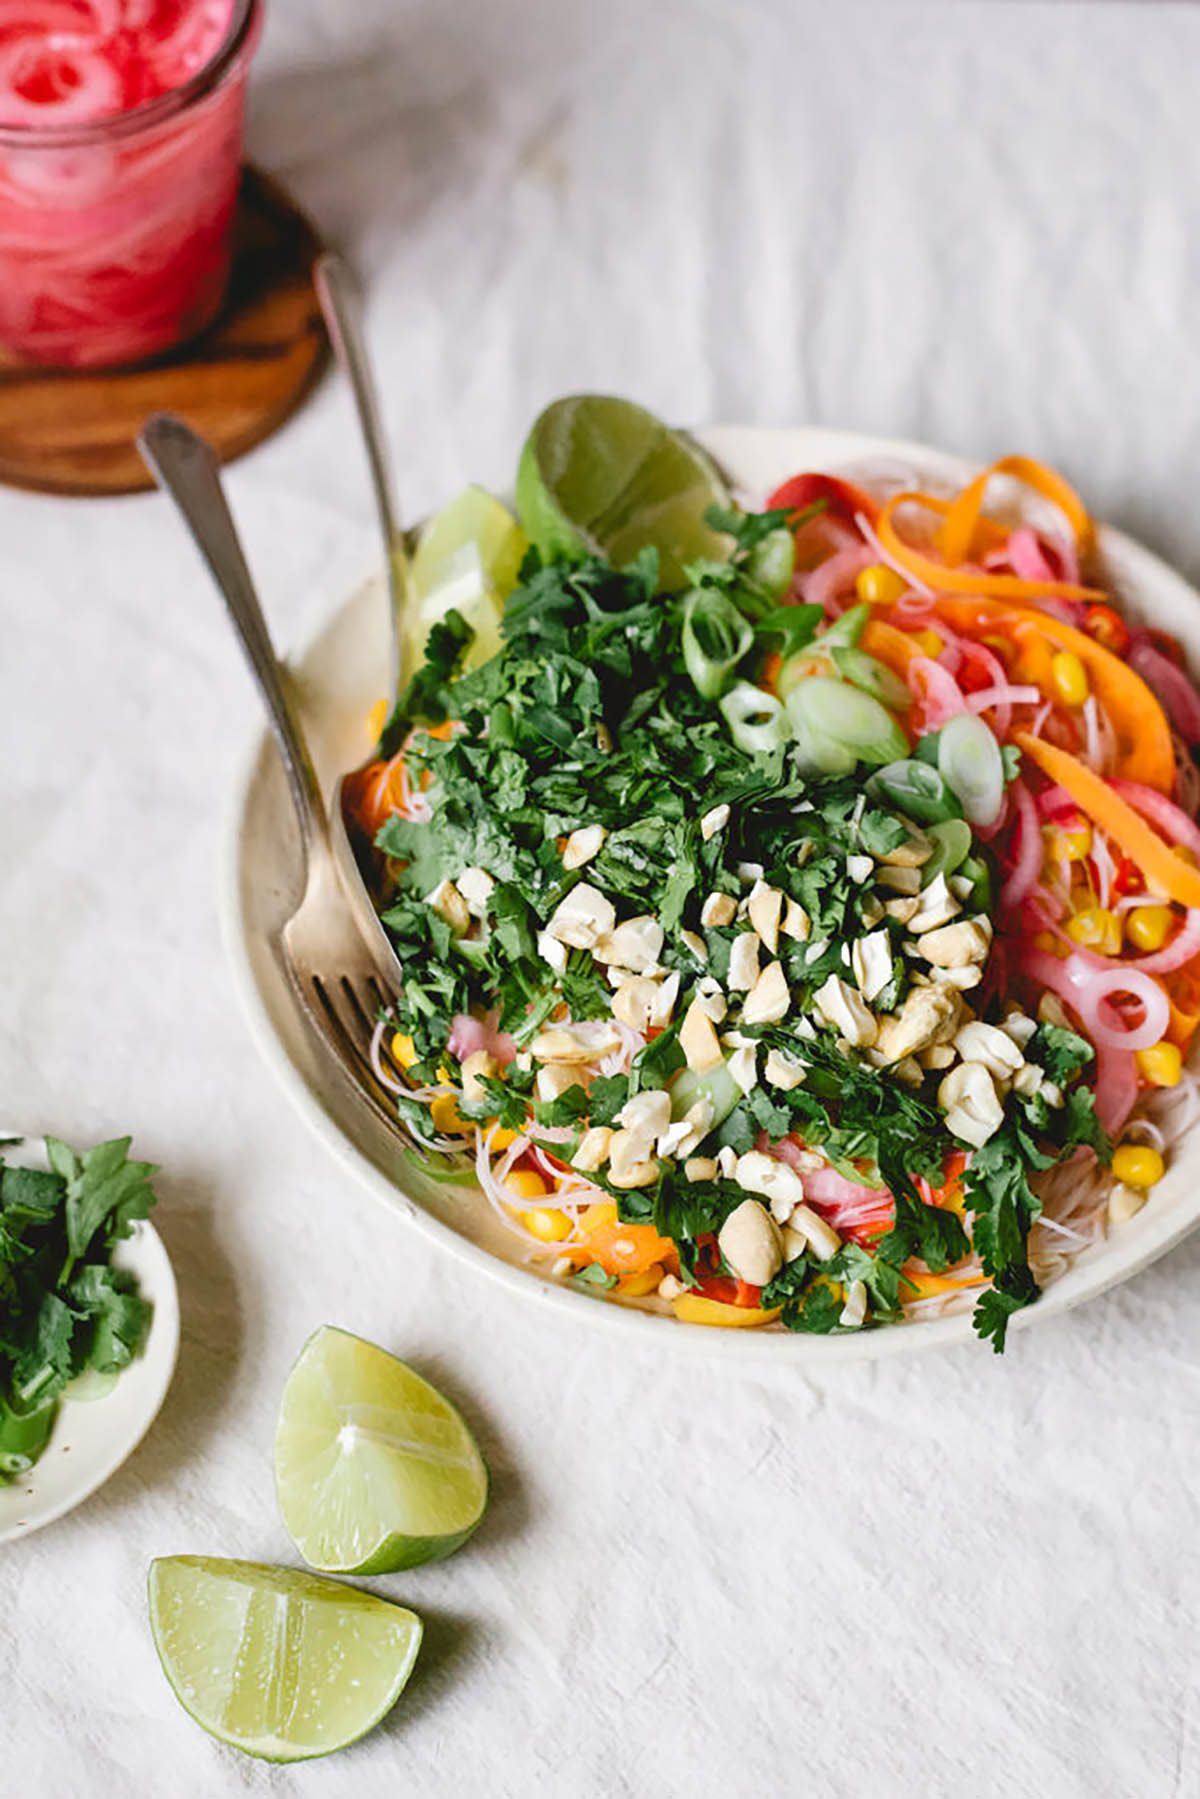 Asian-style salad with carrot ribbons, herbs, and peanuts.